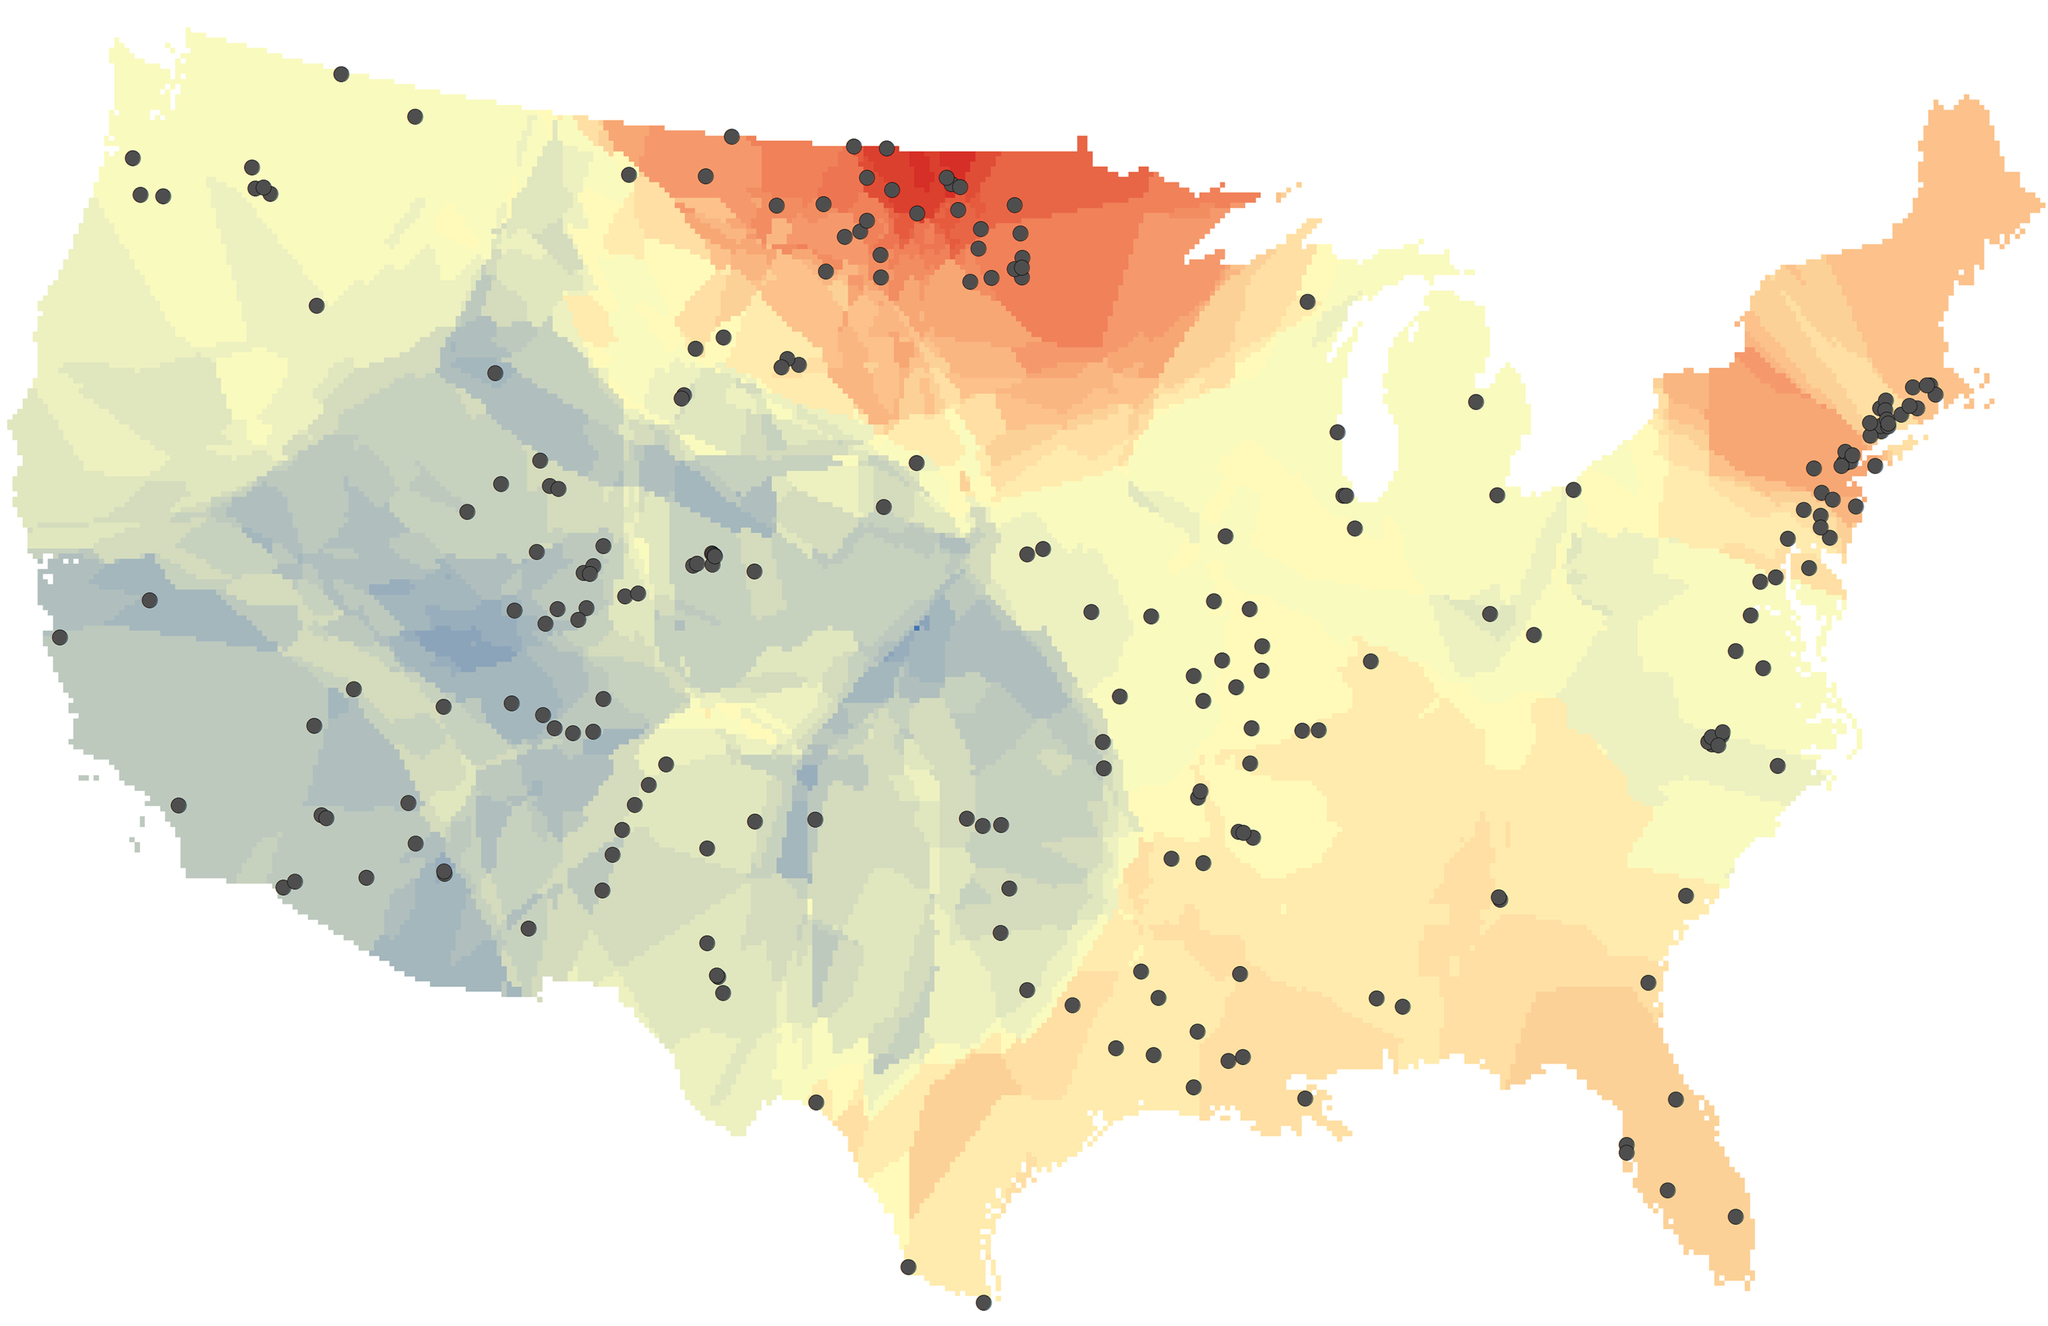 This map shows changes in the salt content of freshwater rivers and streams across the U.S. over the past 50 years. Warmer colors indicate increasing salinity and cooler colors indicate decreasing salinity. The black dots represent the 232 monitoring sites that provided the data. (Image by Chatham University)